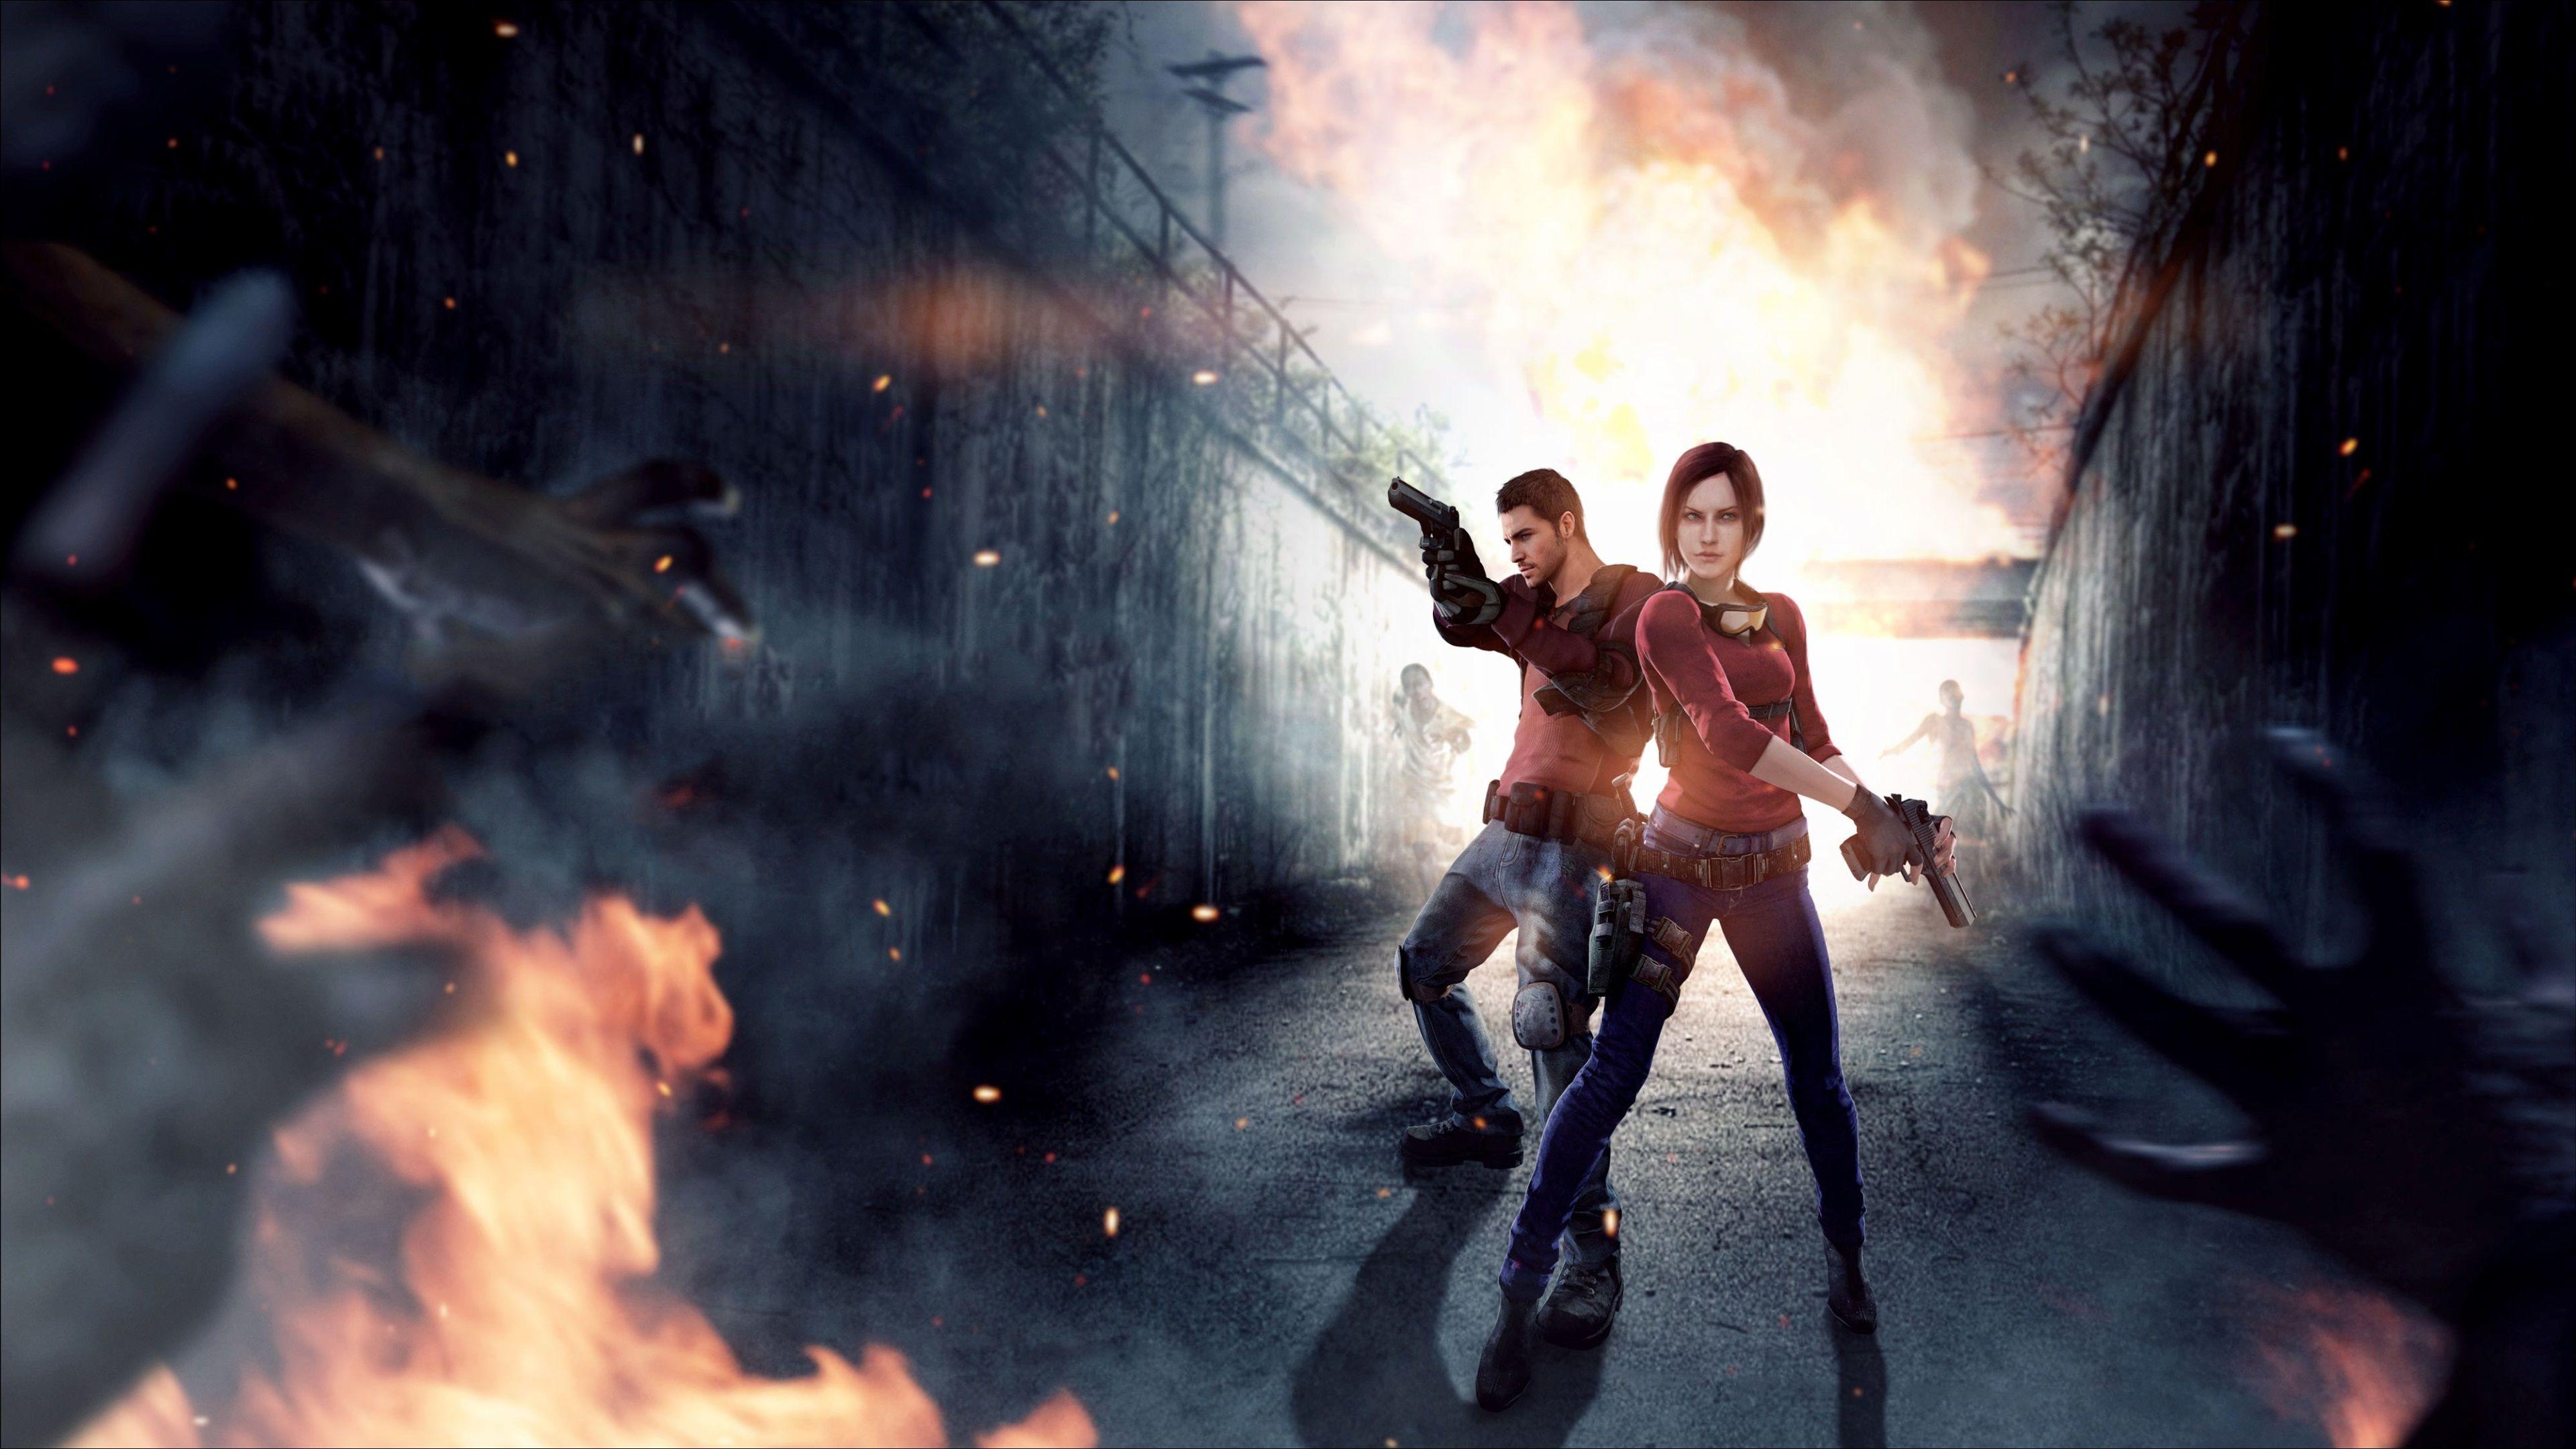 Resident Evil Wallpaper for personal use